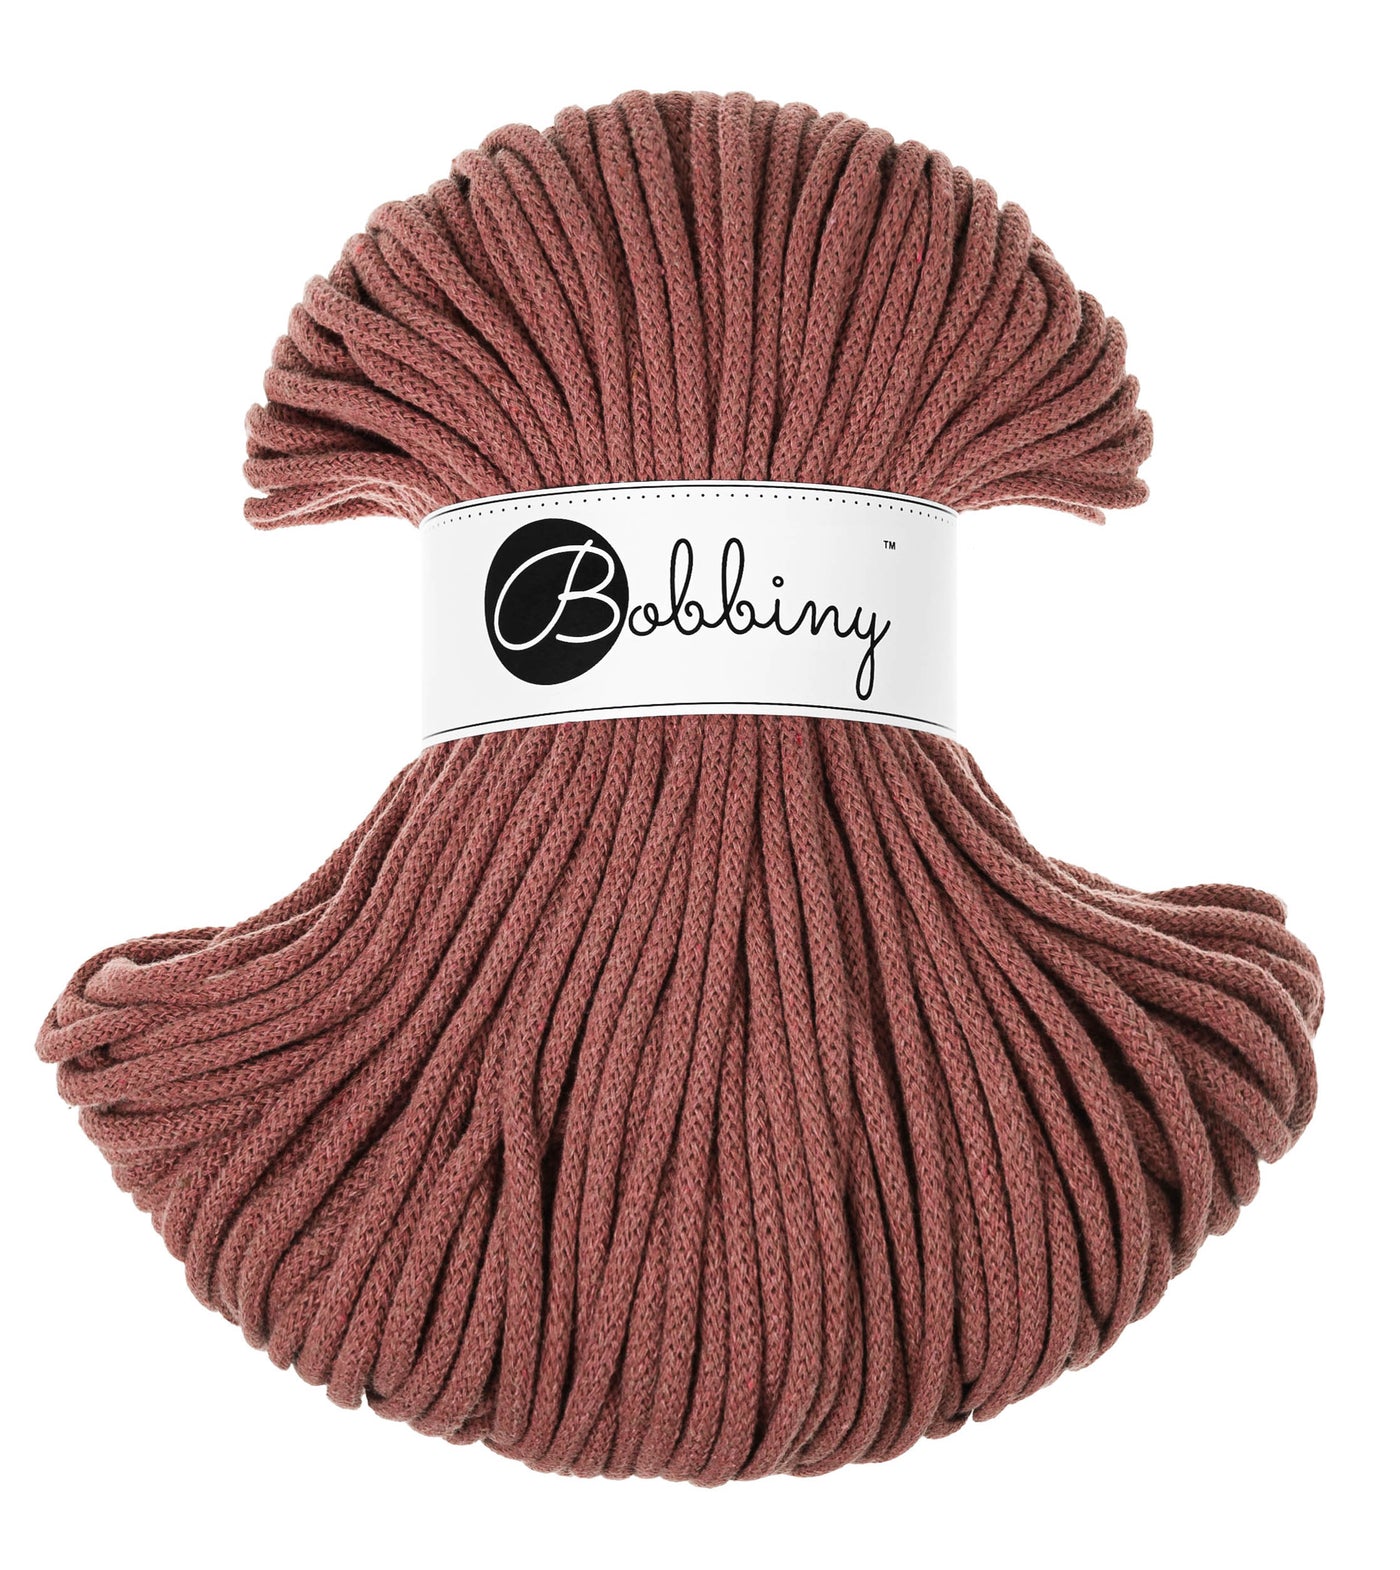 These beautiful Bobbiny cords are made in Poland from 100% recycled cottons and are non-toxic, certified safe for children and meet certified worldwide textile standards.  5mm Diameter  100 metres Length  Recommended for use with 10-12mm crochet or knitting needles  Cotton inner and outer layers, perfect for use with Macrame, Crochet or Knitting   